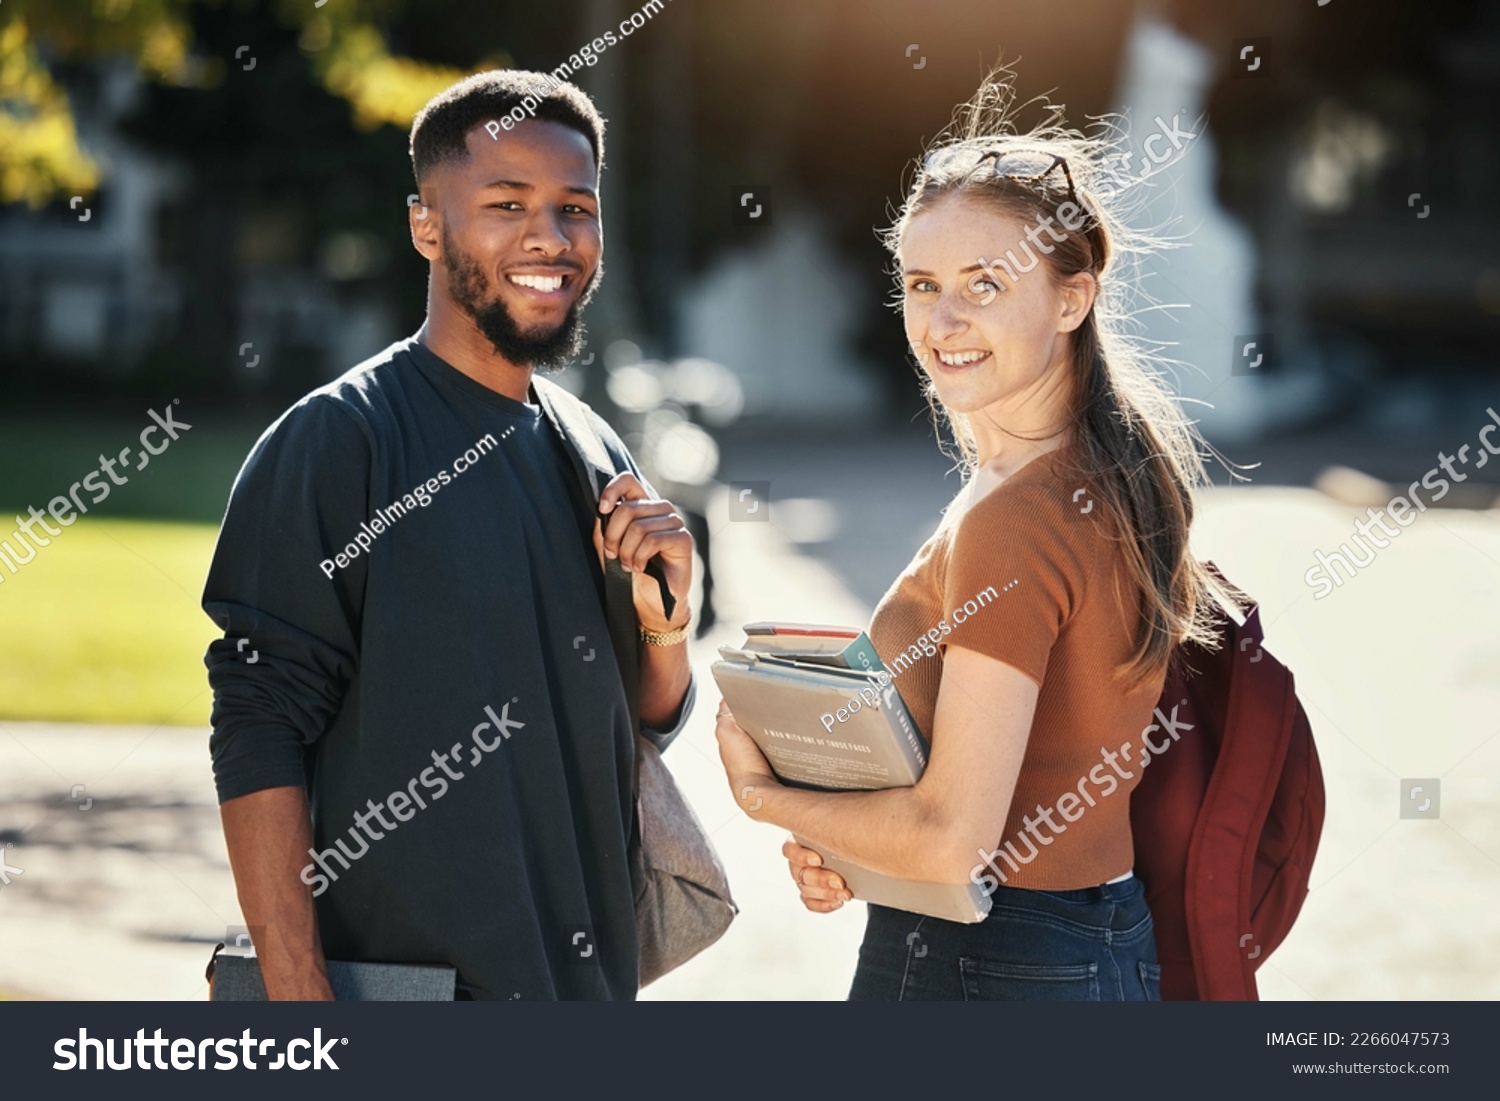 Students, couple or university friends walking together with books for education and learning on campus with scholarship. Portrait of an interracial man and woman together on college or school ground #2266047573